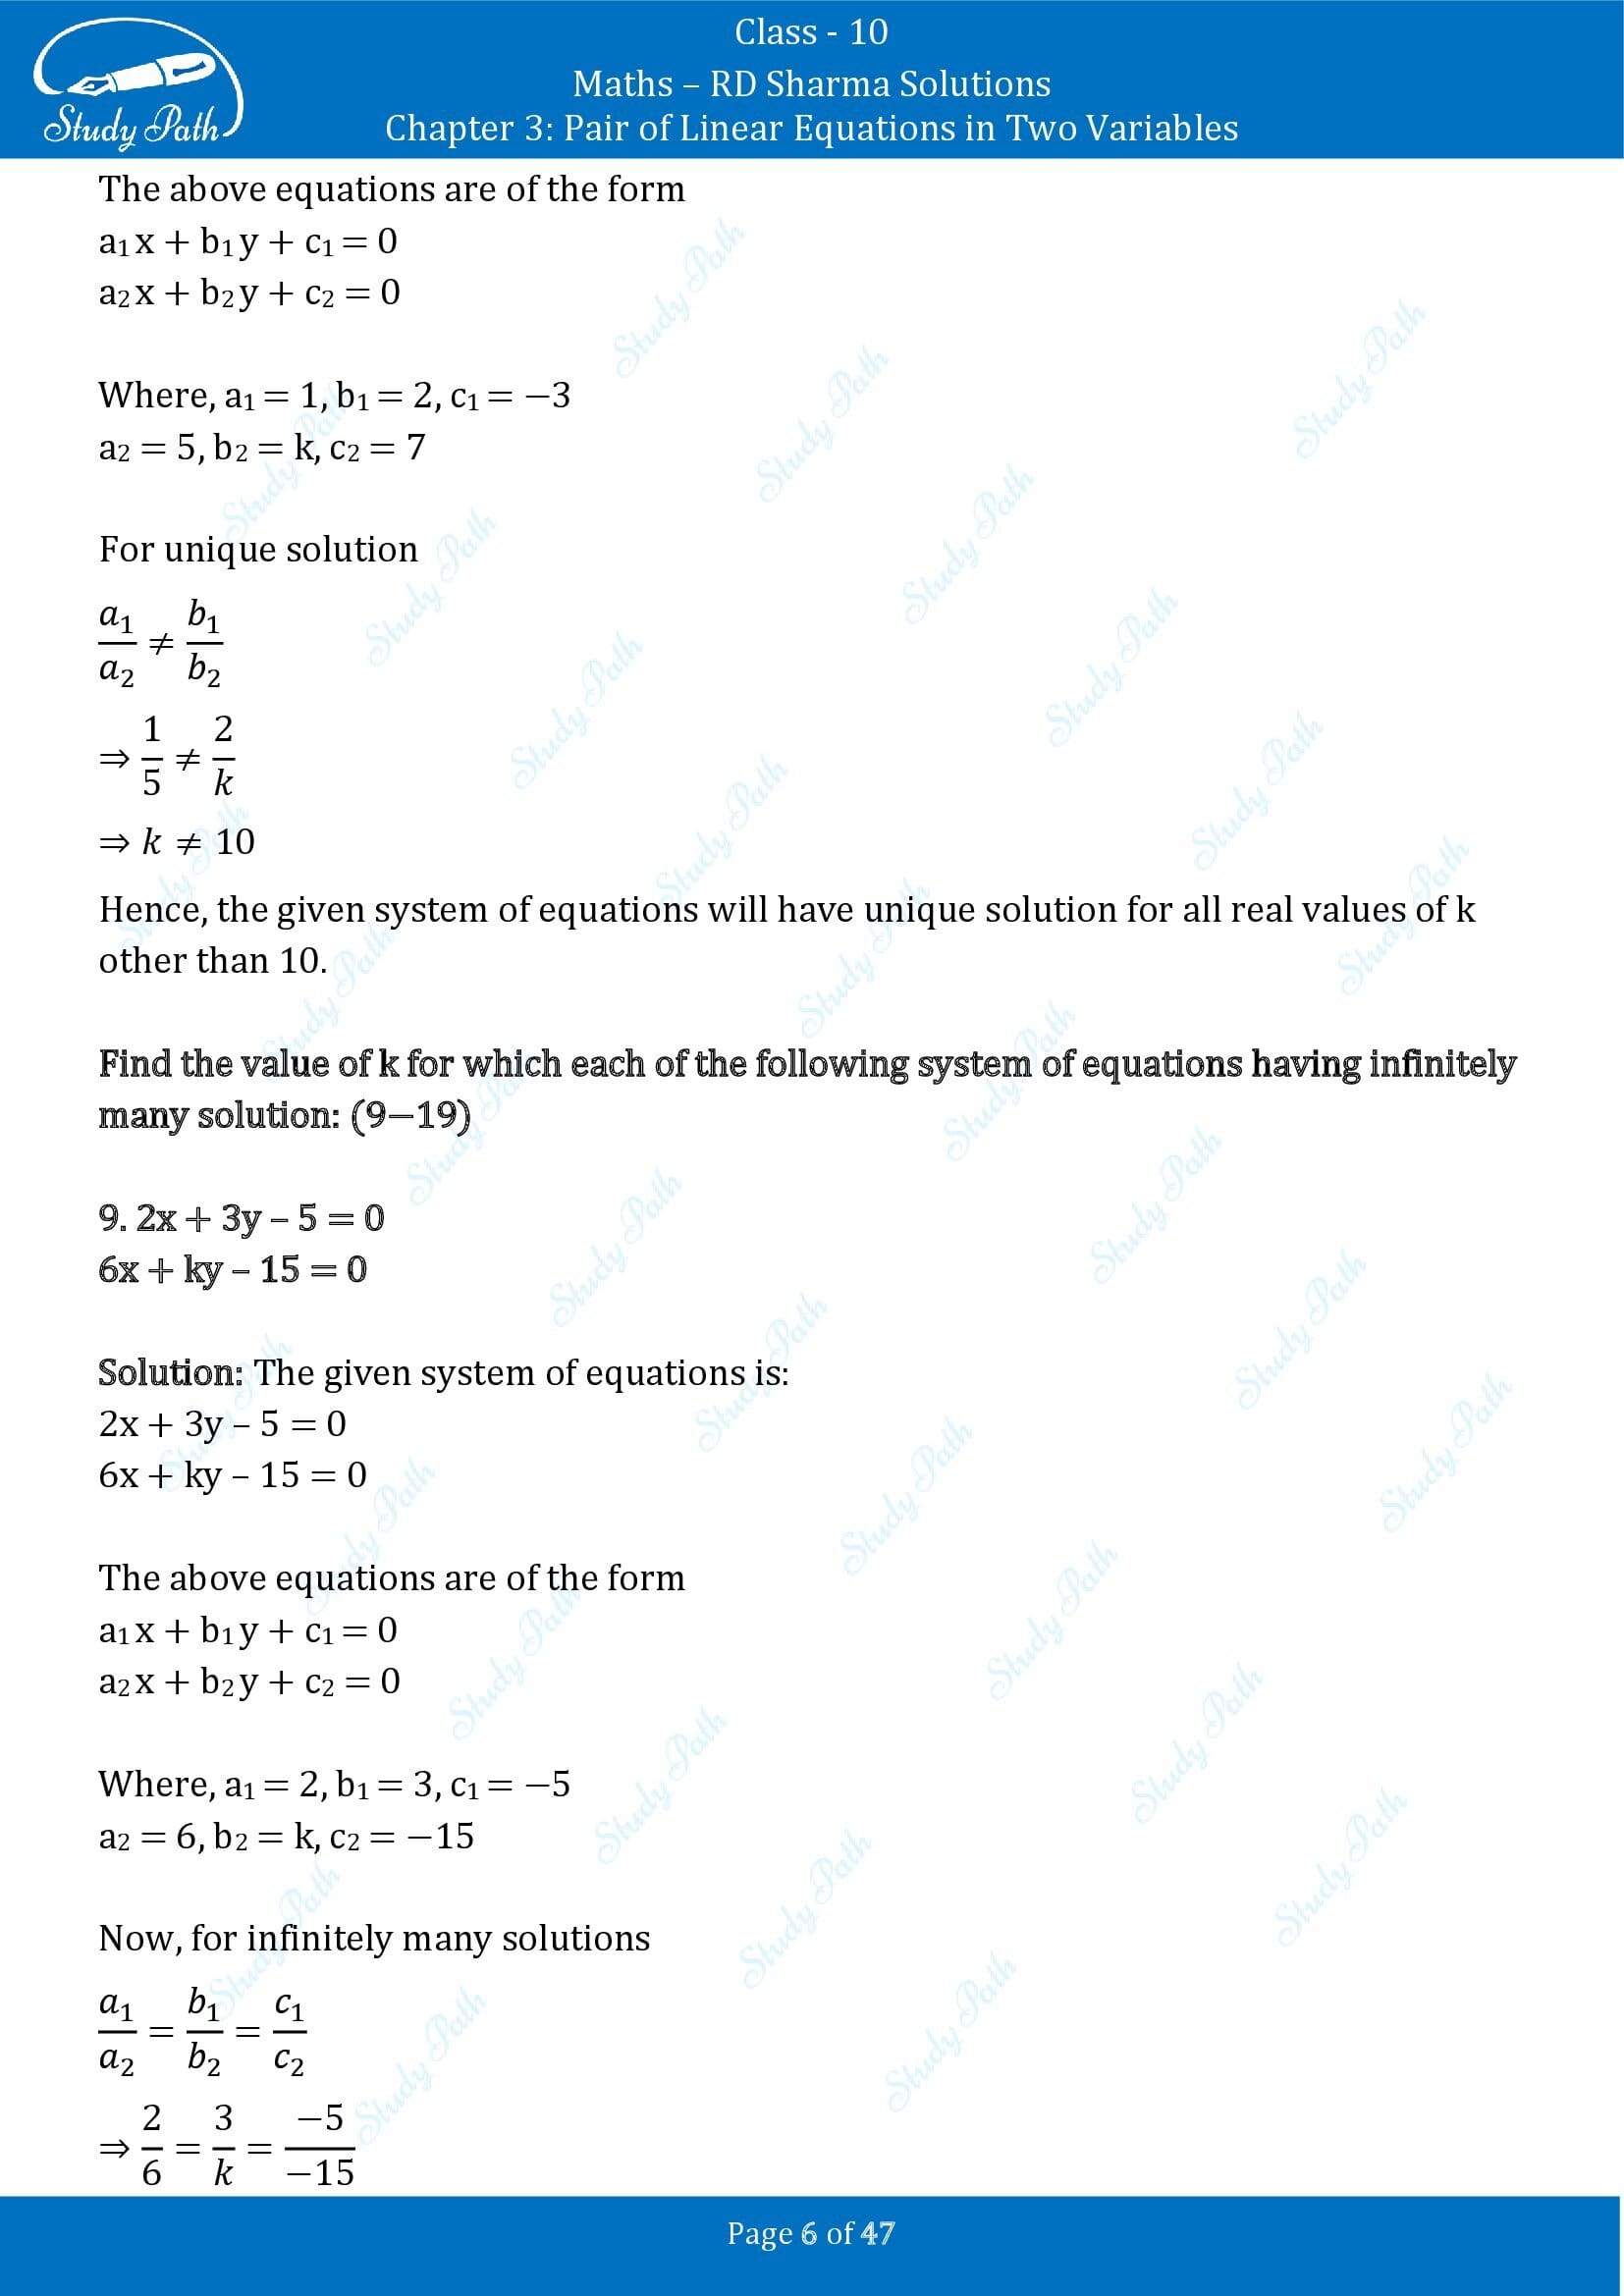 RD Sharma Solutions Class 10 Chapter 3 Pair of Linear Equations in Two Variables Exercise 3.5 00006